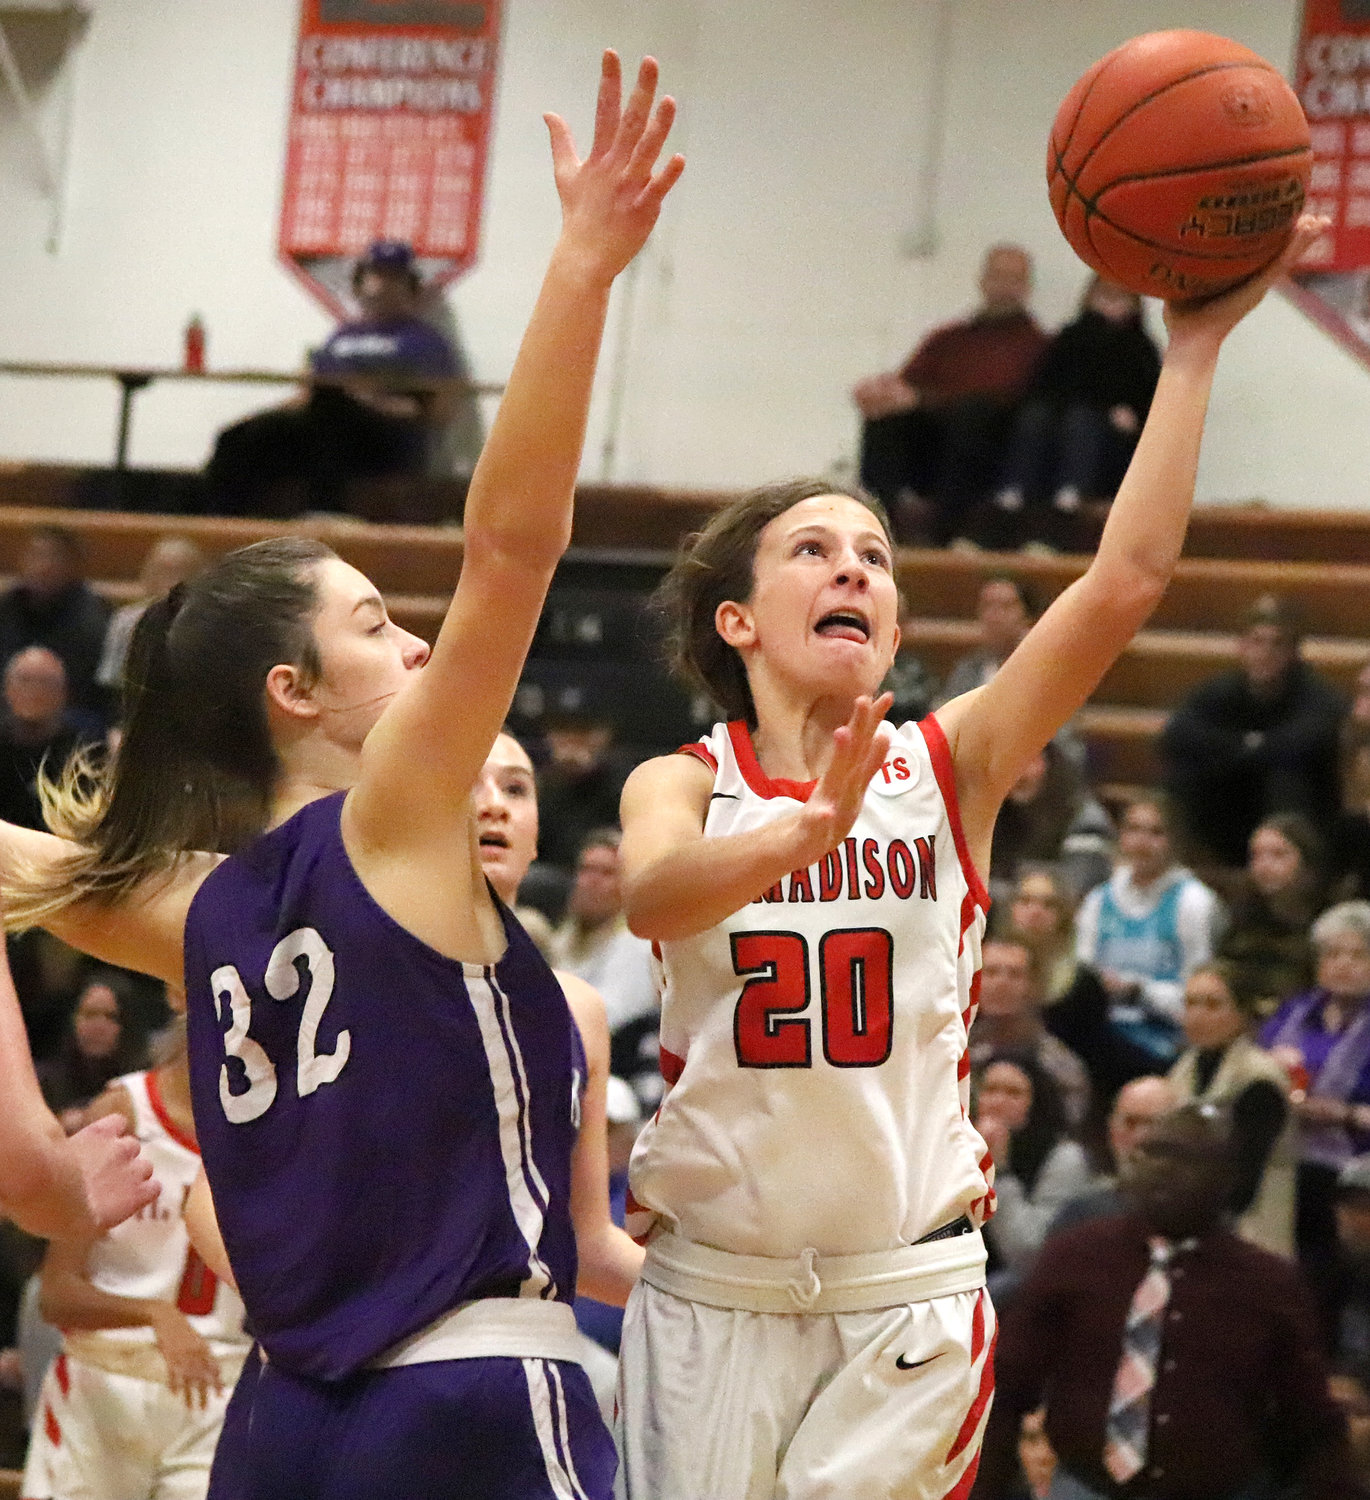 Freshman Hadley Wolfe lays up a shot against Keokuk's Camryn Atterberg in the first period Friday night.